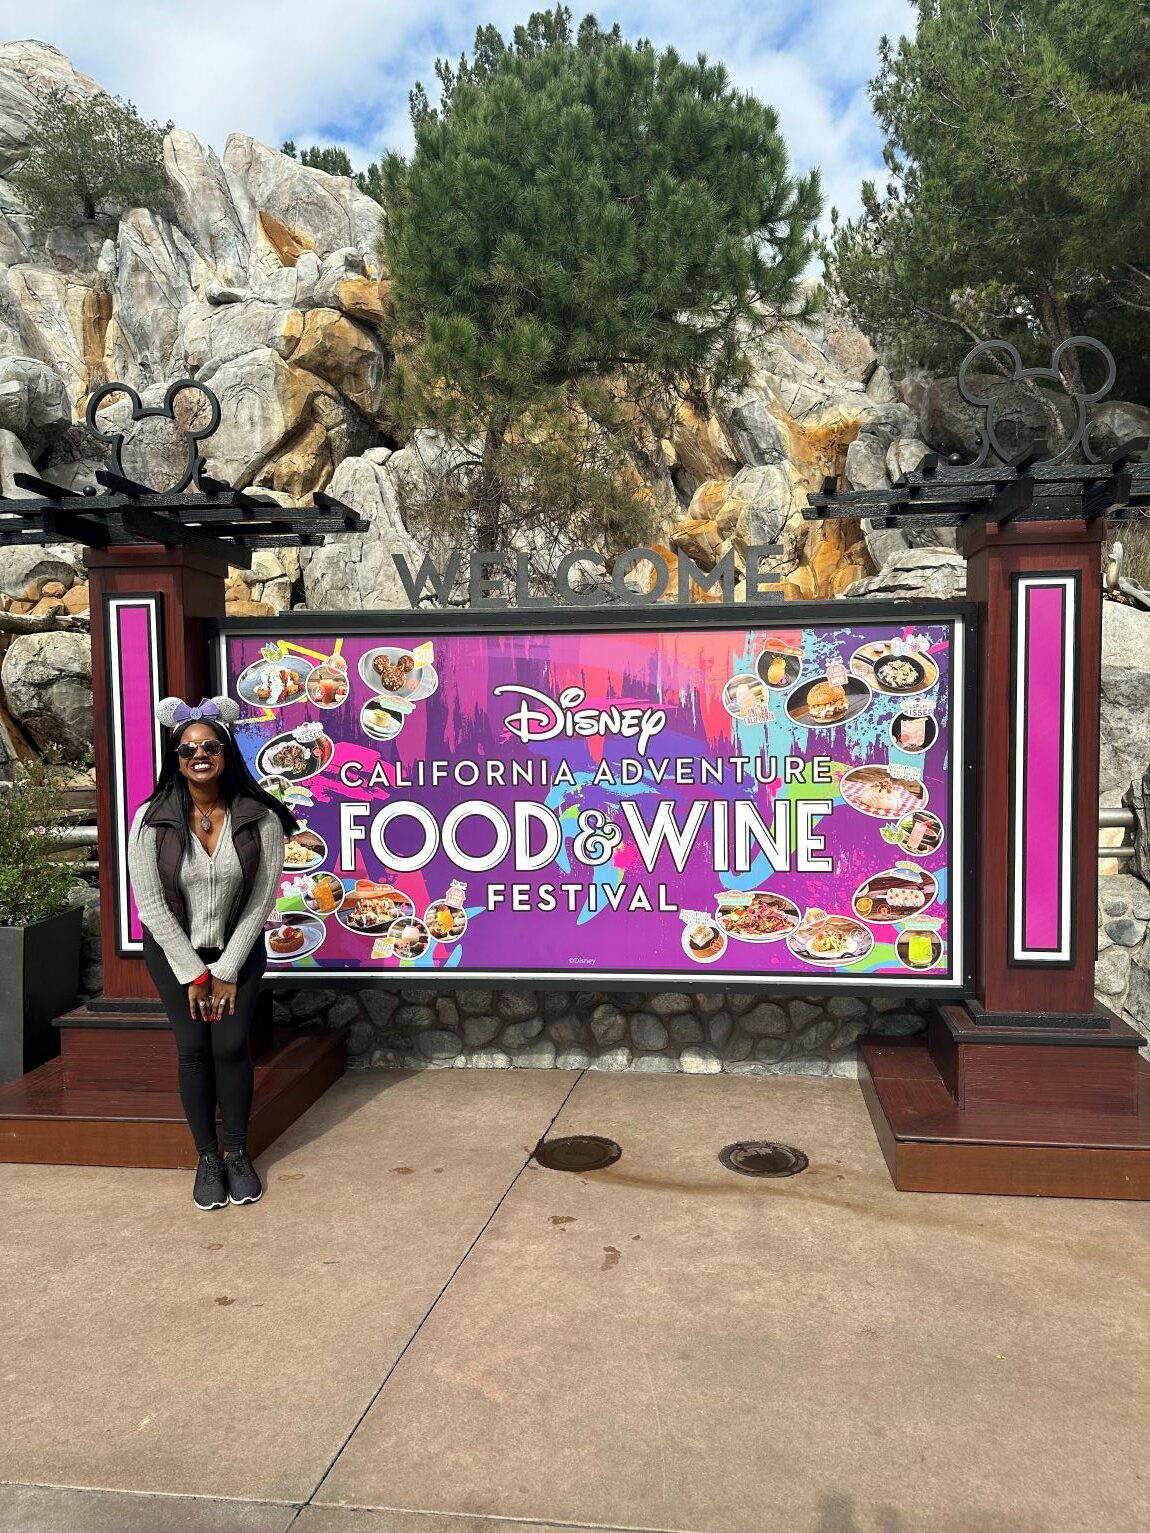 An image of lifestyle blogger Ariel at the Disney California Adventure Food & Wine Festival